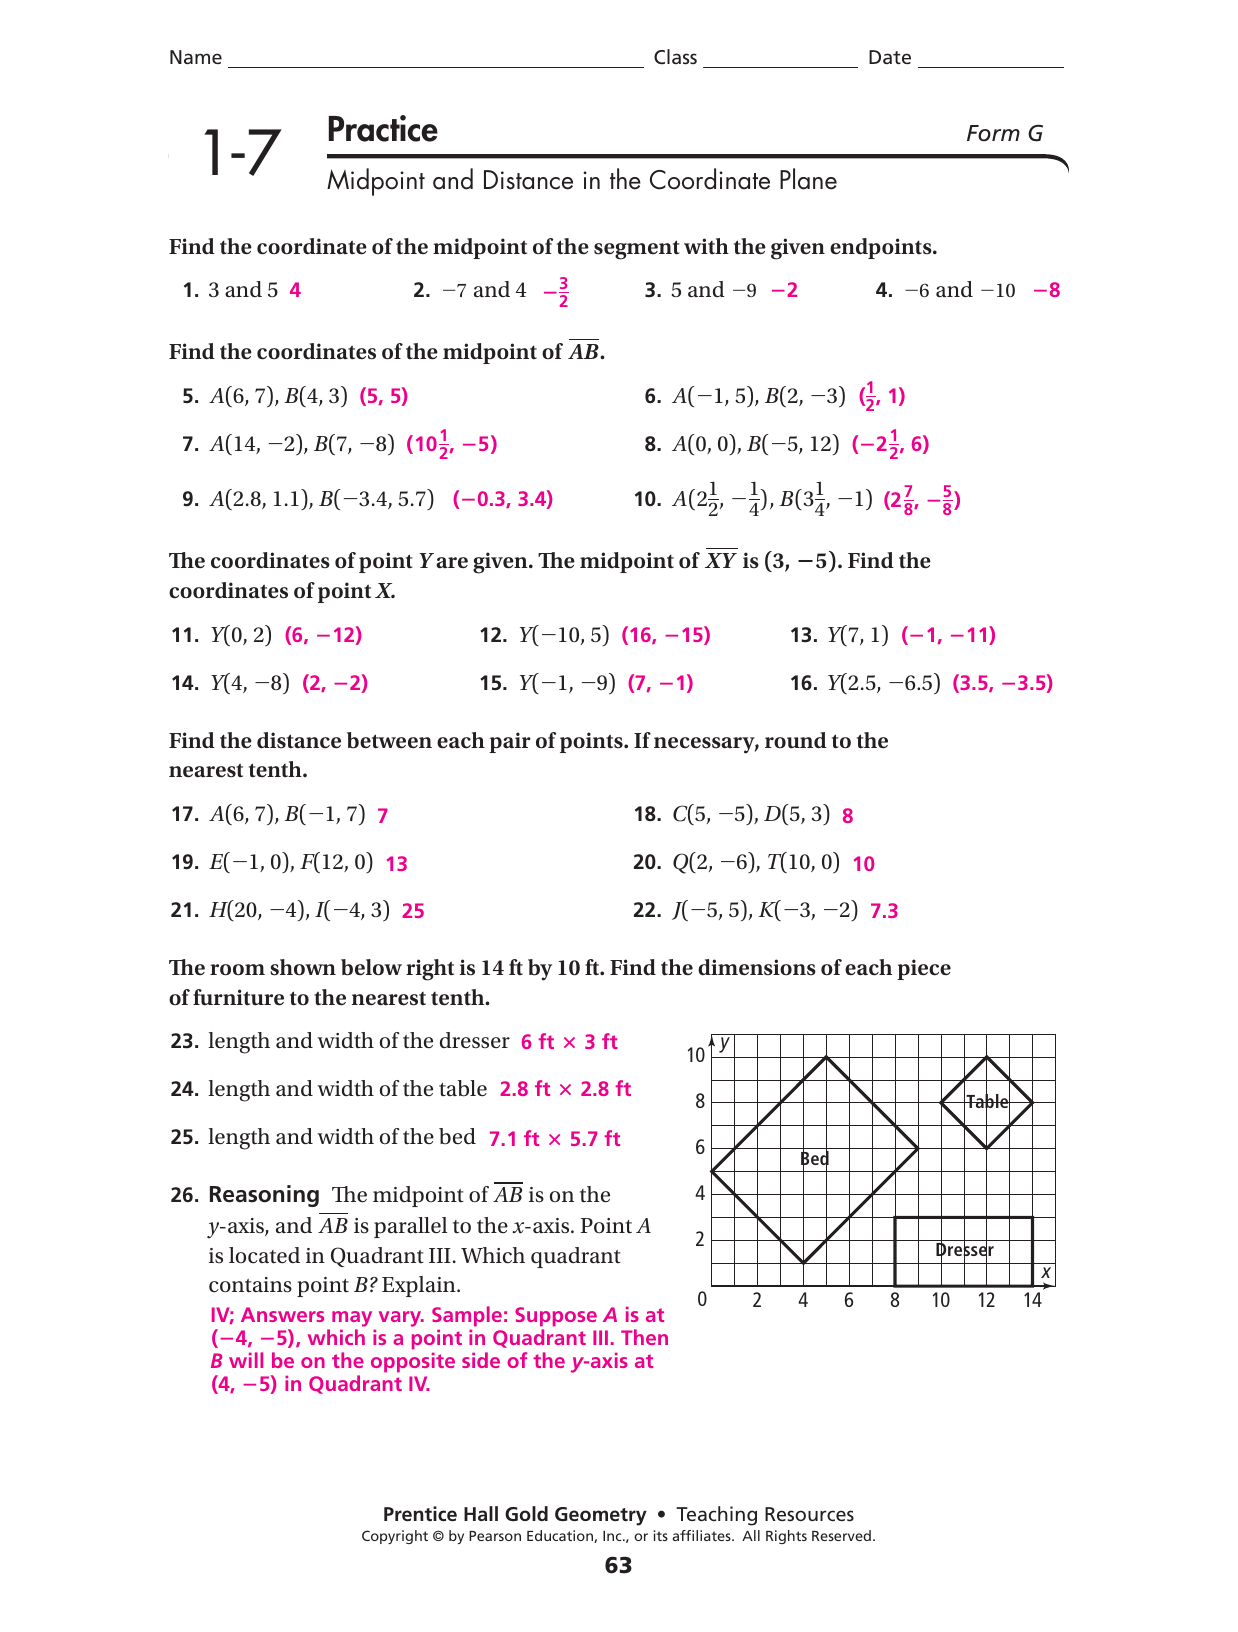 geometry-worksheet-1-3-distance-and-midpoints-answers-gustavogargiulo-free-scientific-method